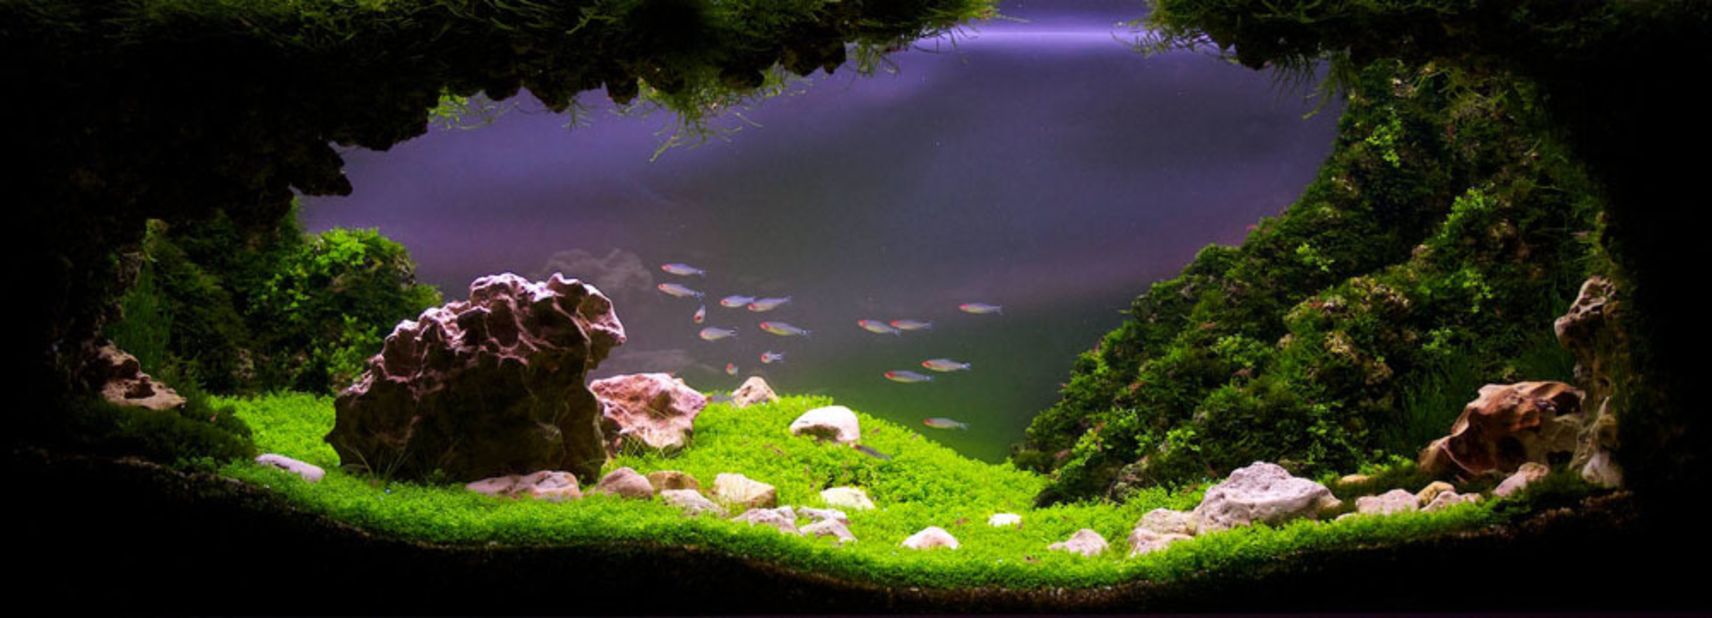 Aquascaping requires careful timing. Different plants come into bloom at different times, so designers must plan their tanks well in advance of any competition. Entitled "Stepping out into the valley", this tank was photographed six months after its Latvian acquascaper started it. 